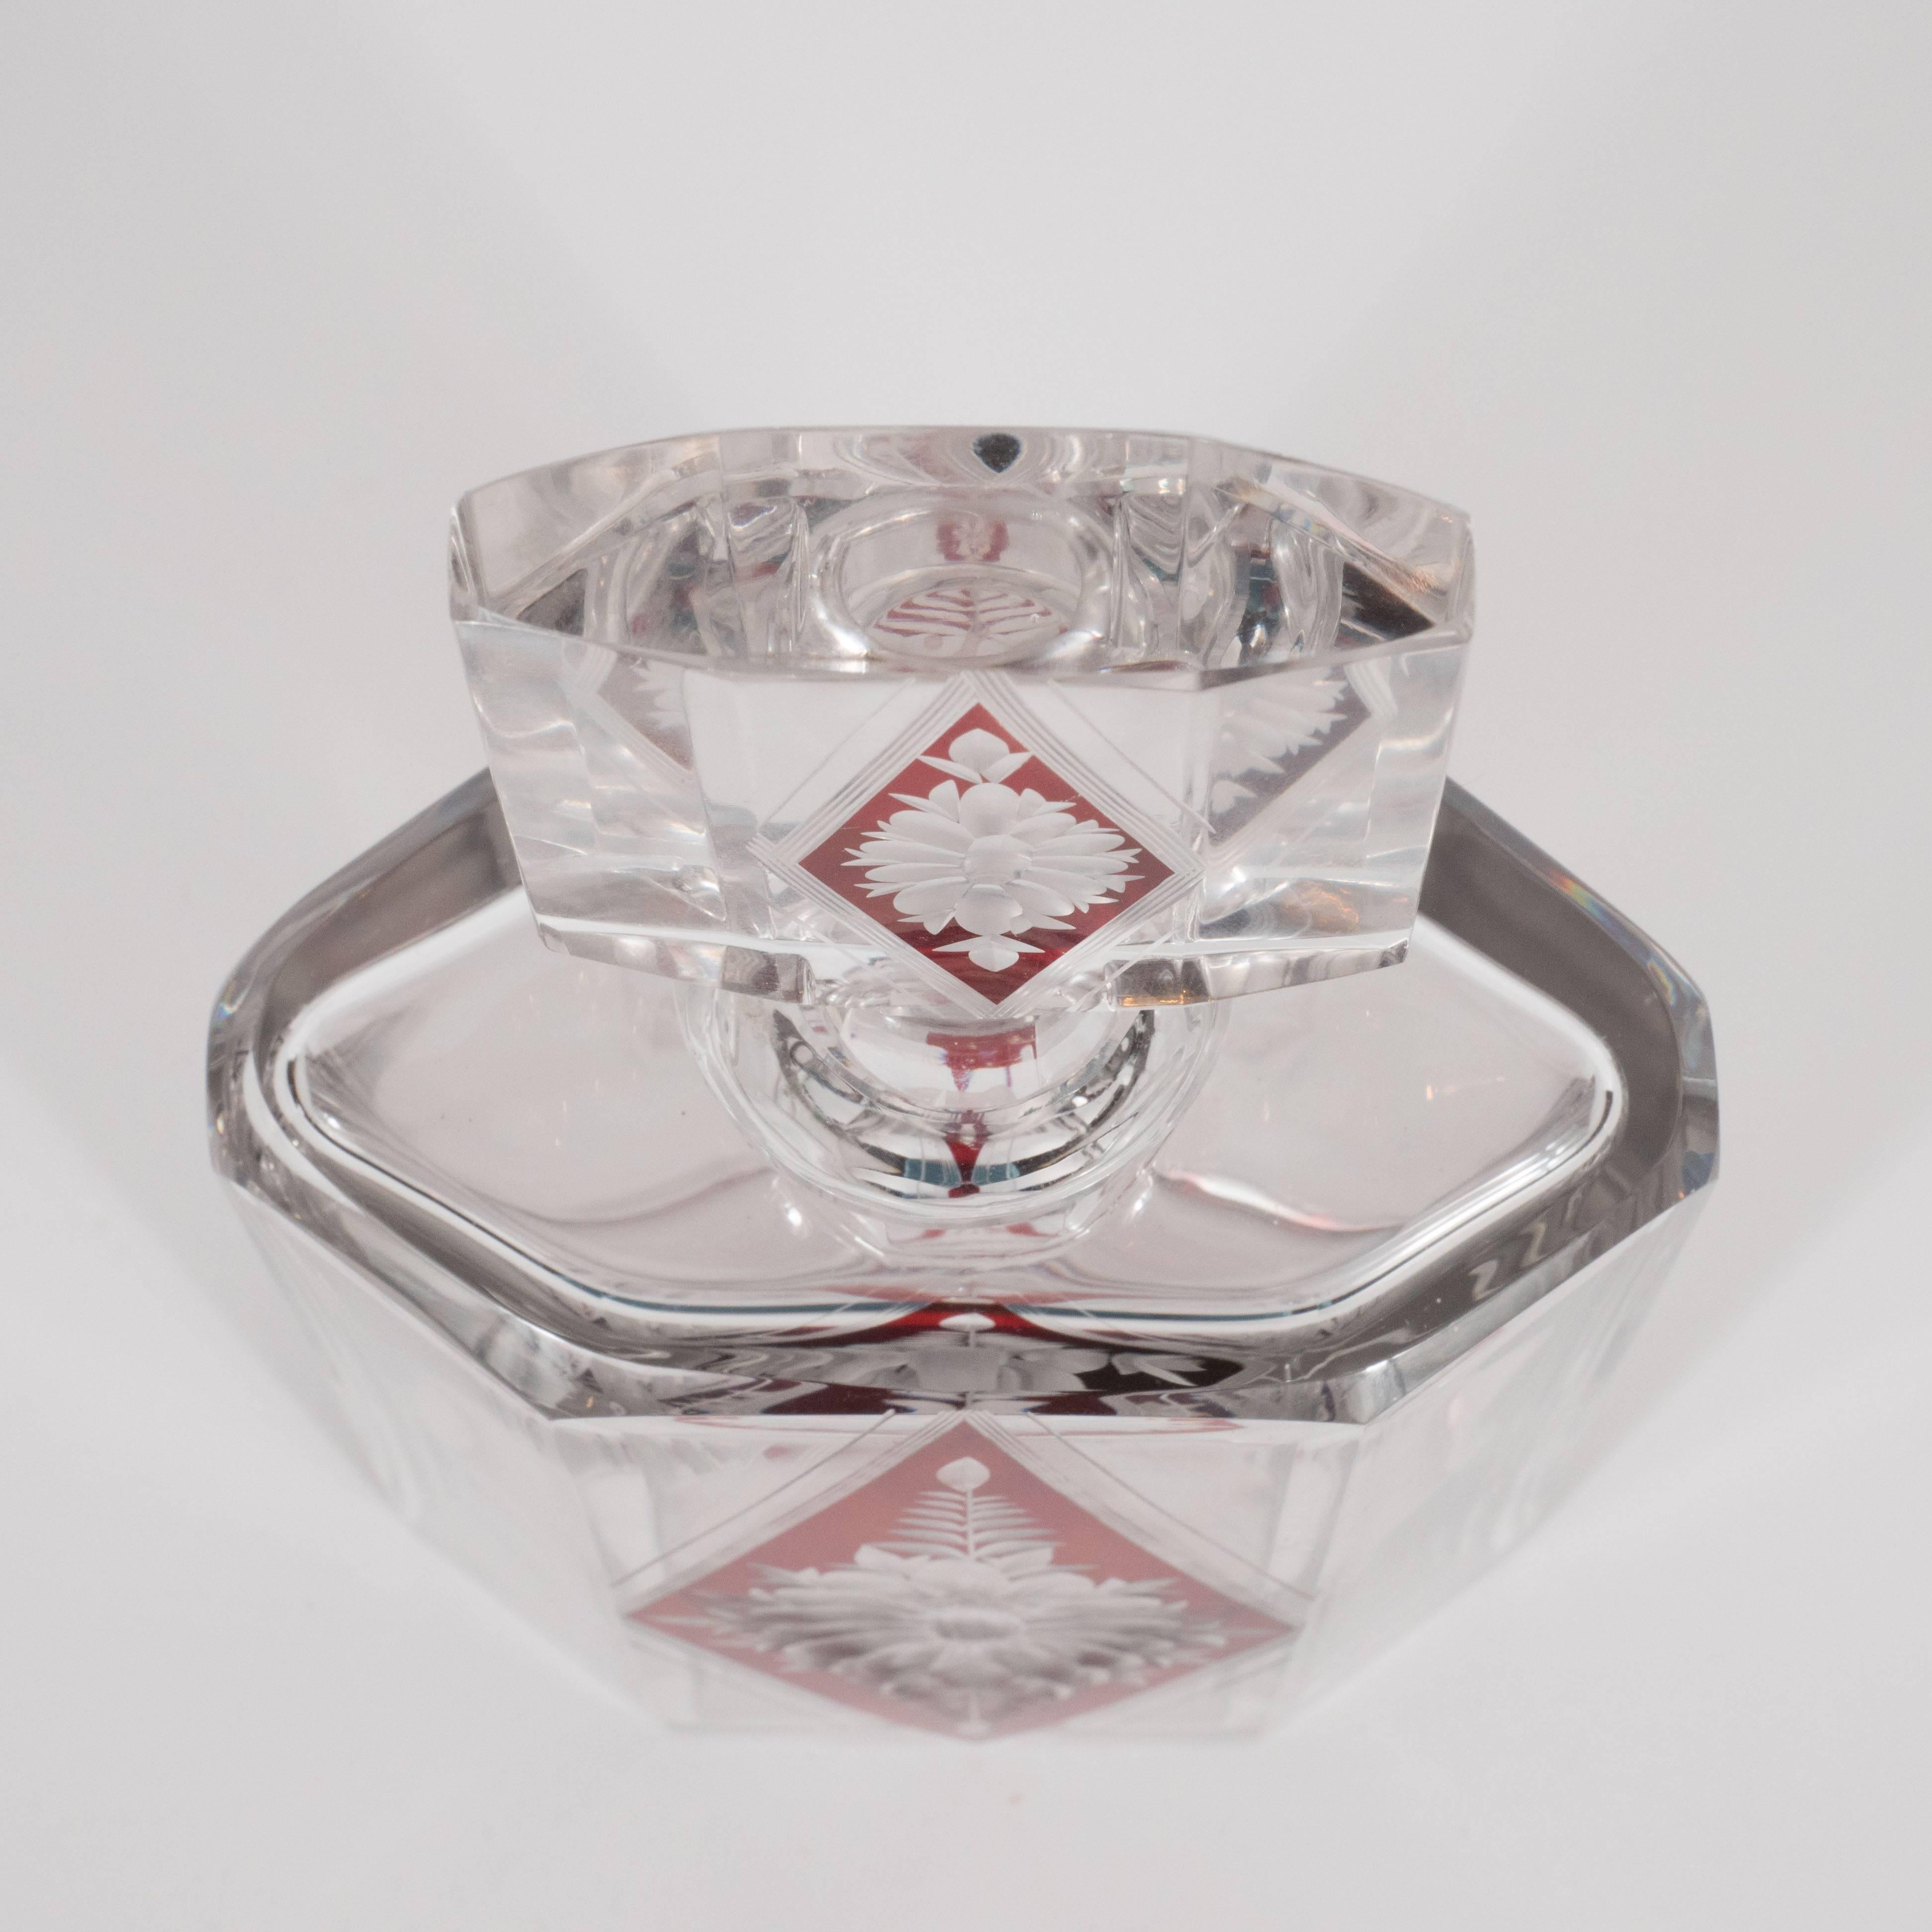 Cut Glass Art Deco Czech Crystal Decanter with Stained Cardinal Red Glass and Floral Motif